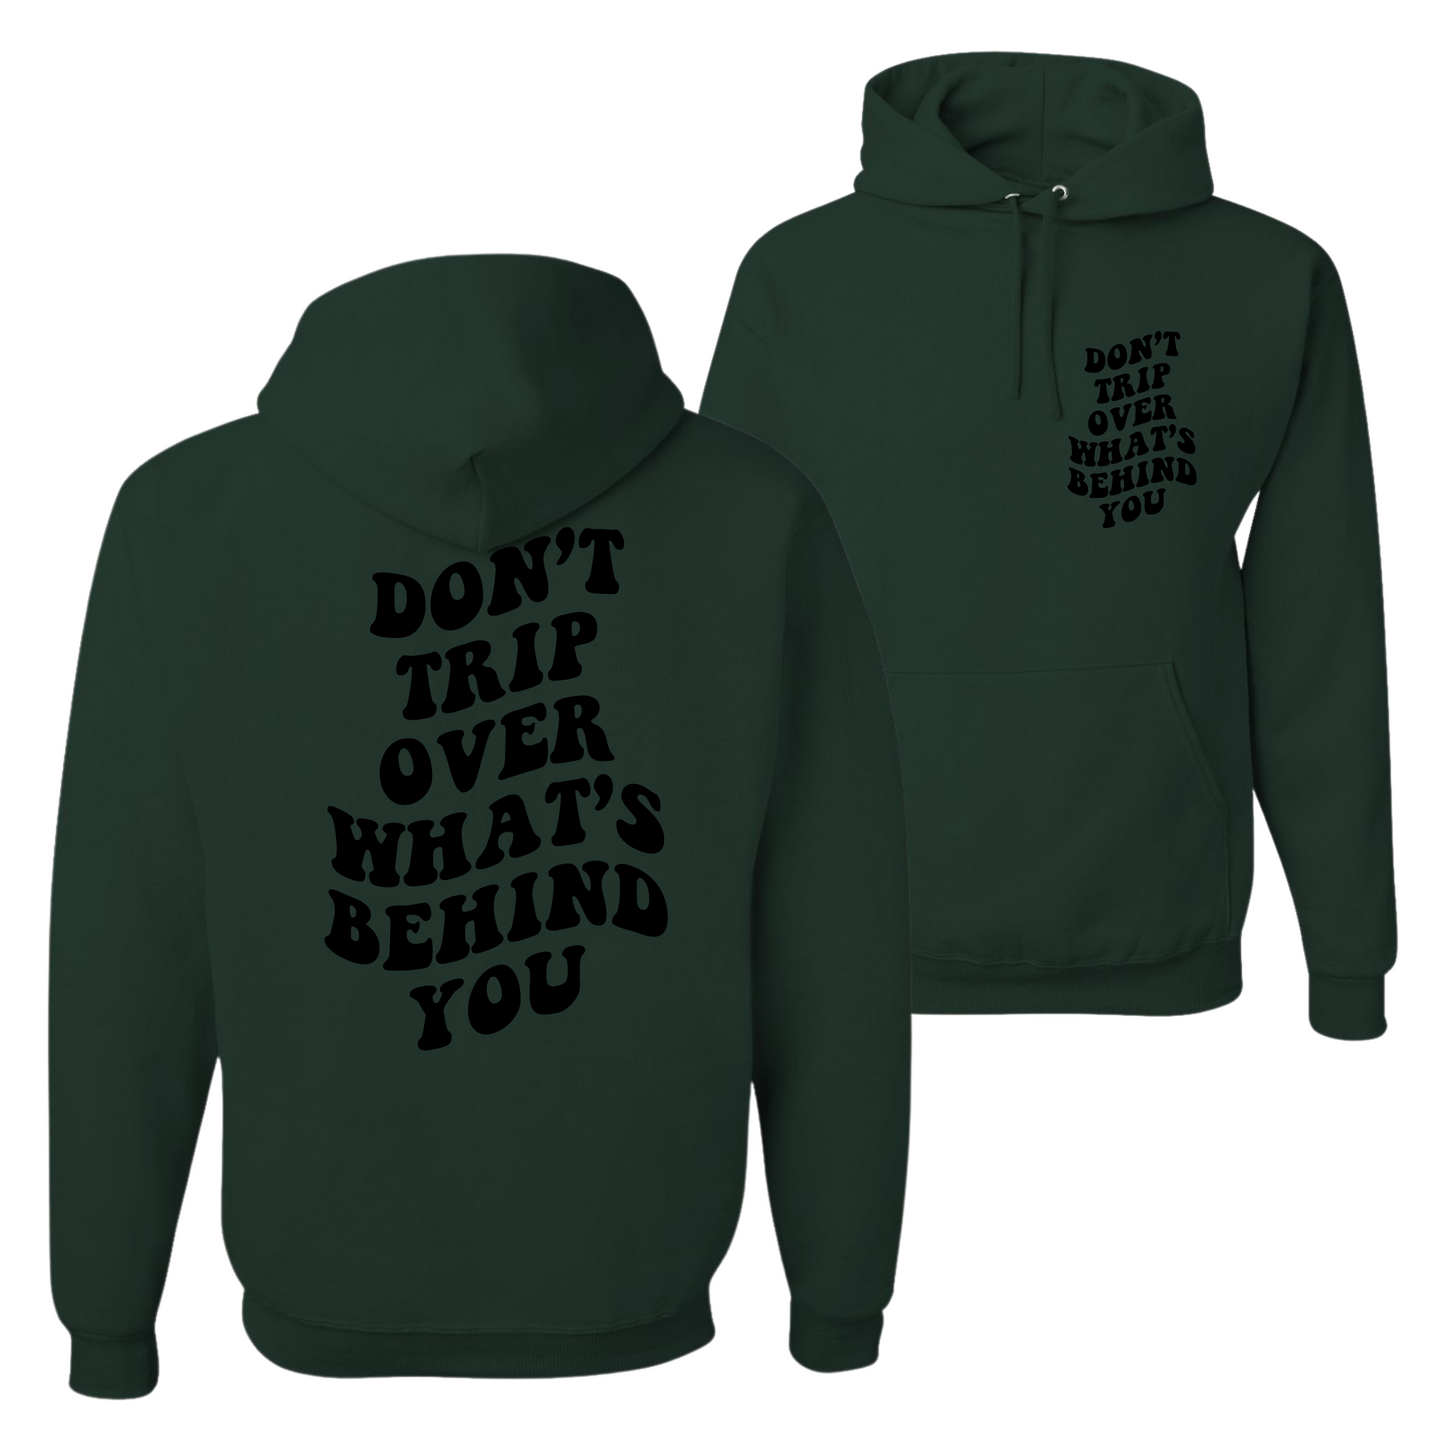 Resiliently Bold Don't Trip Over What's Behind You Forest Green Hooded Sweatshirt